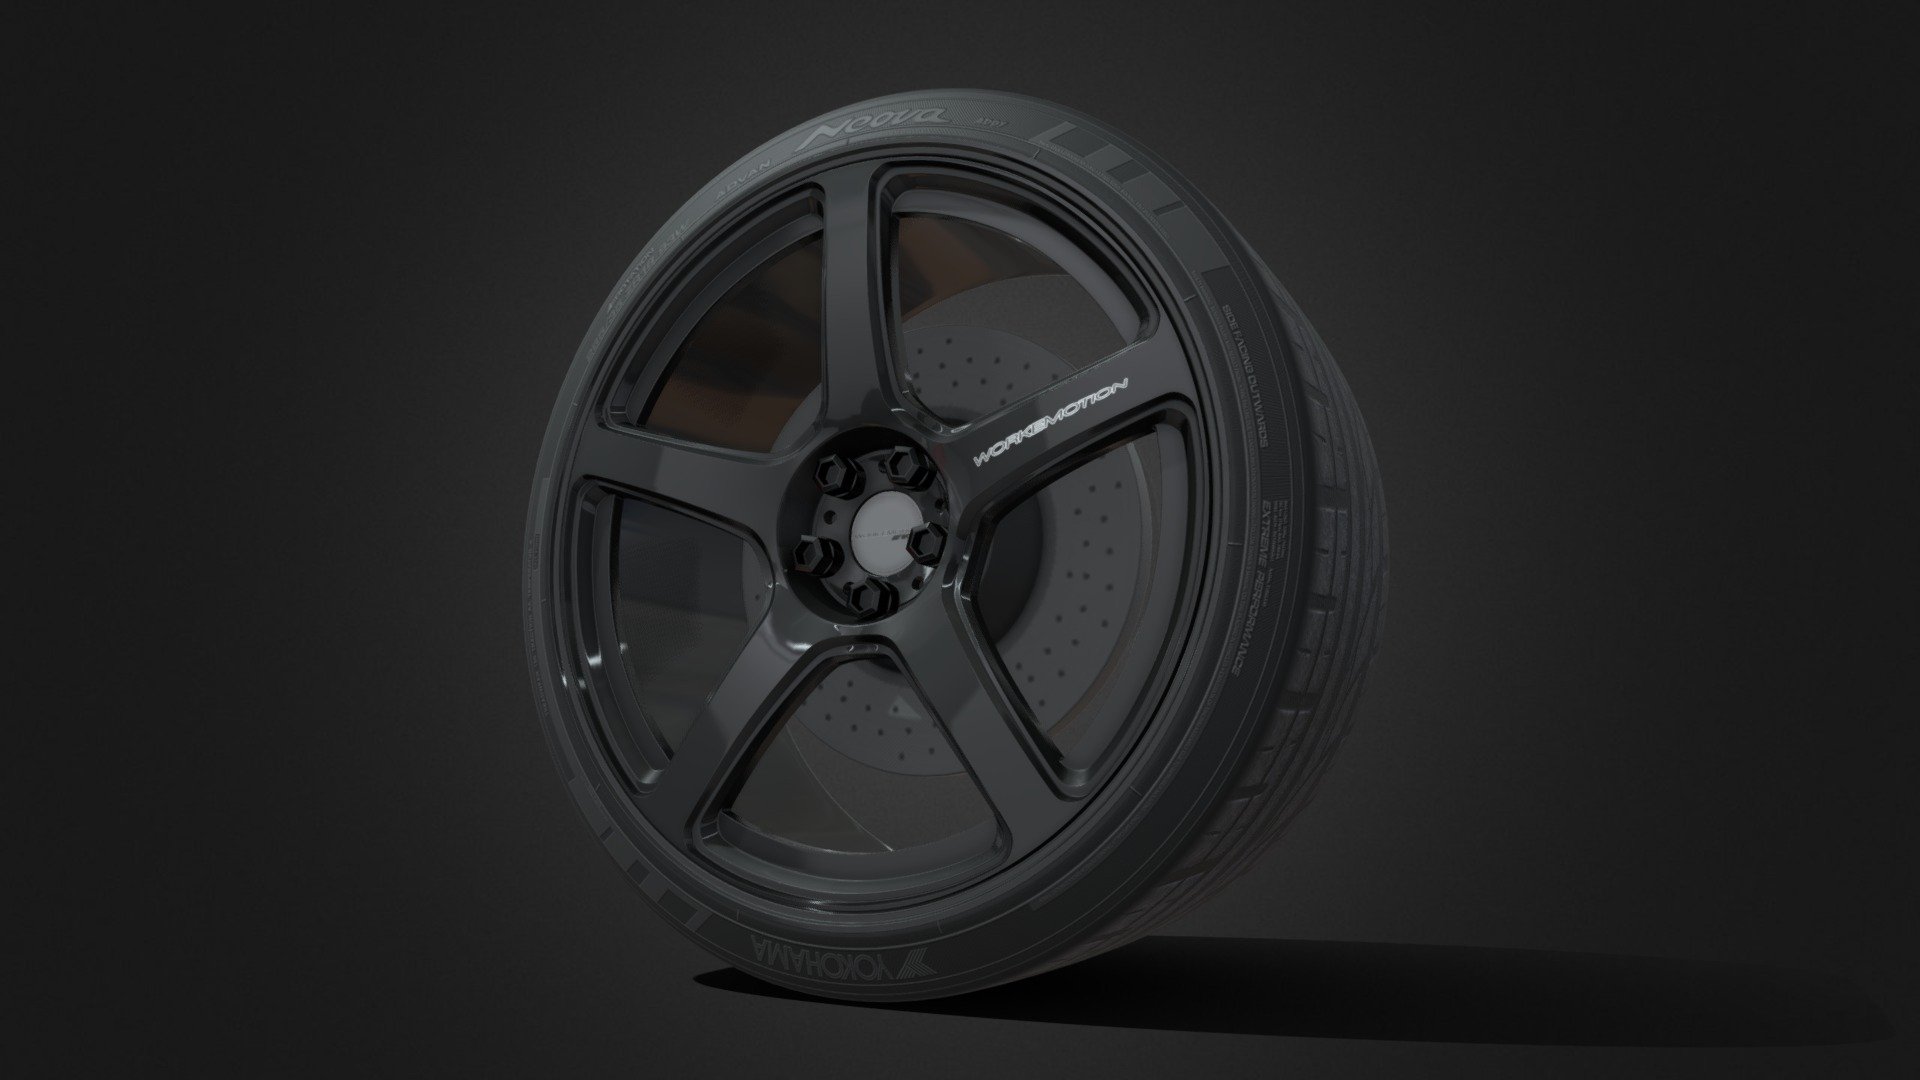 just an unfinished model cuz there's a mistake on the spoke shape. But yea whatev, you can use it 3d model